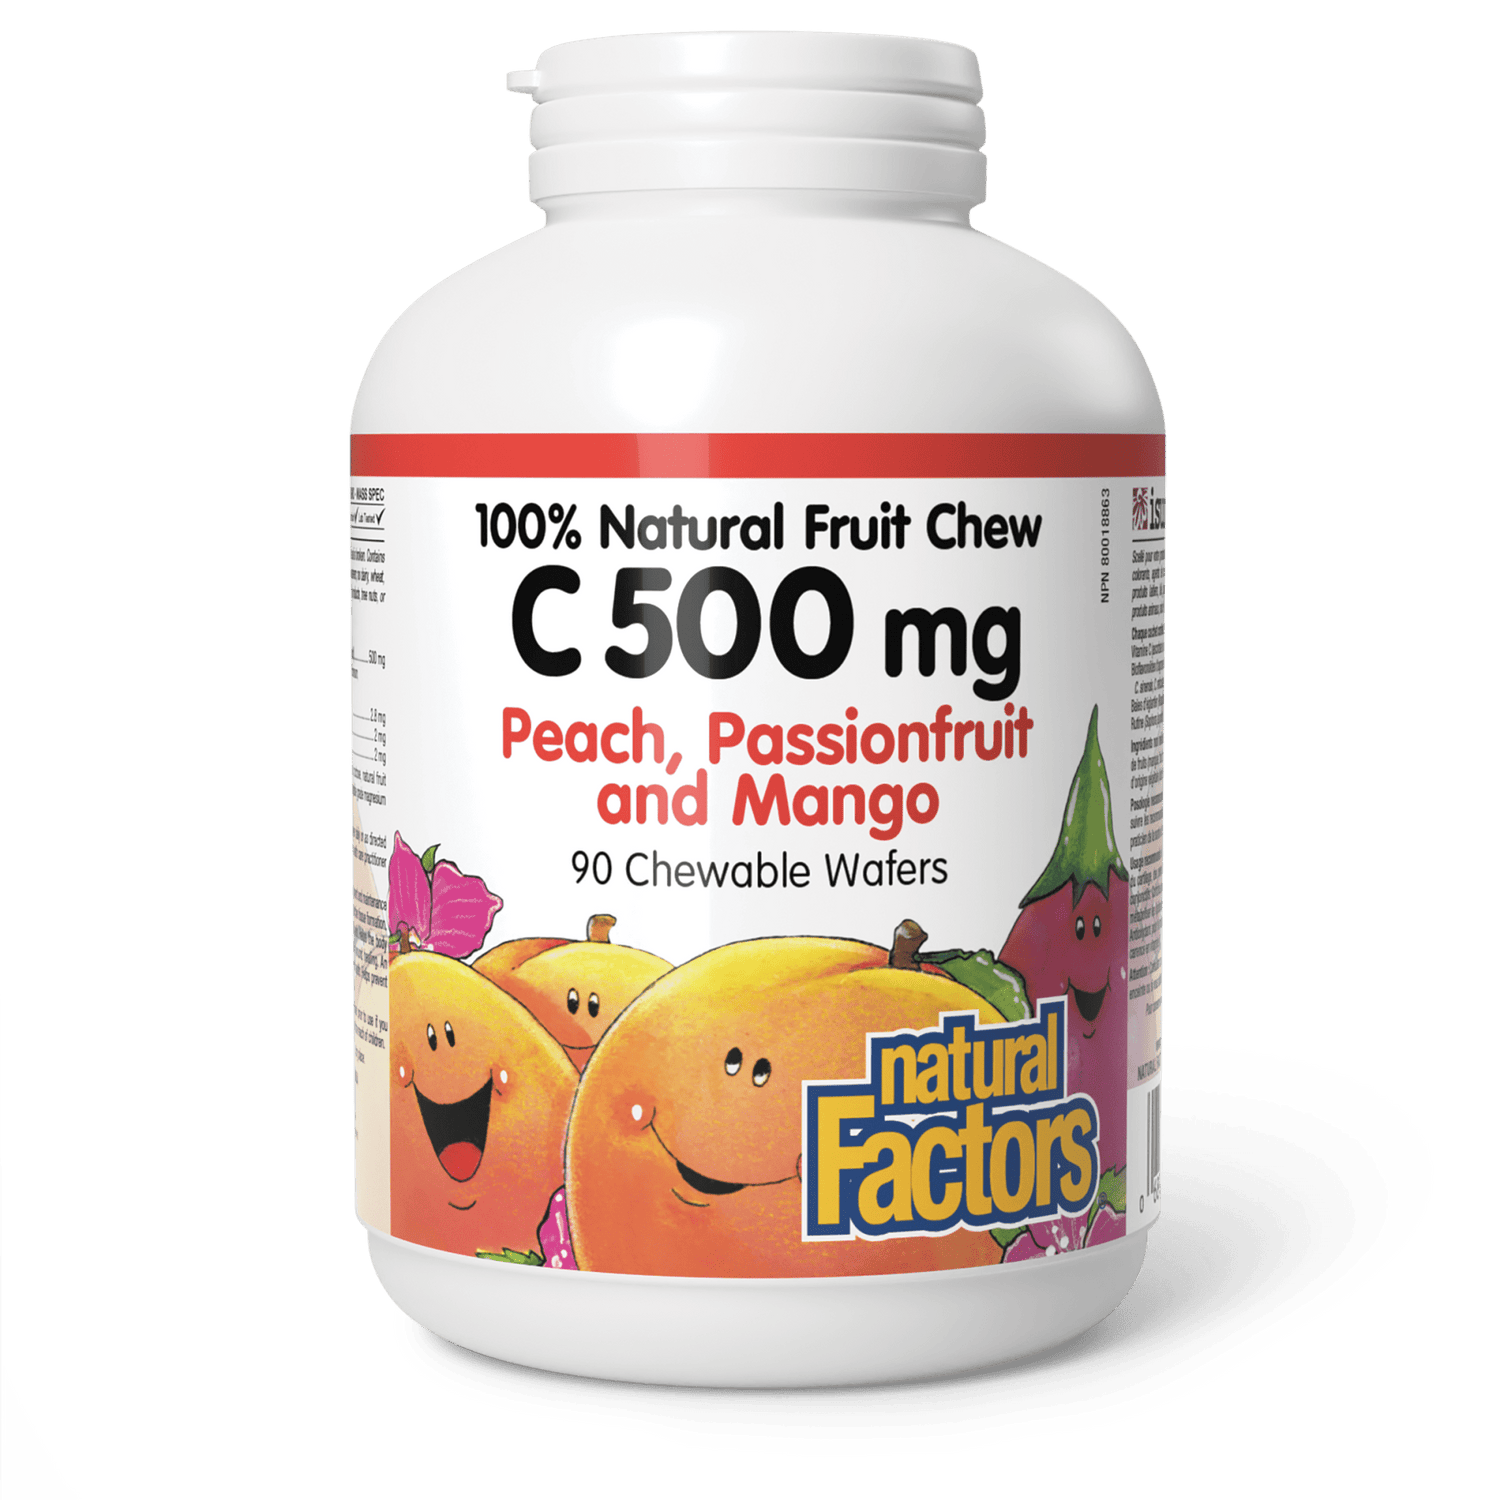 C 500 mg 100% Natural Fruit Chew, Peach, Passionfruit, and Mango, Natural Factors|v|image|1324